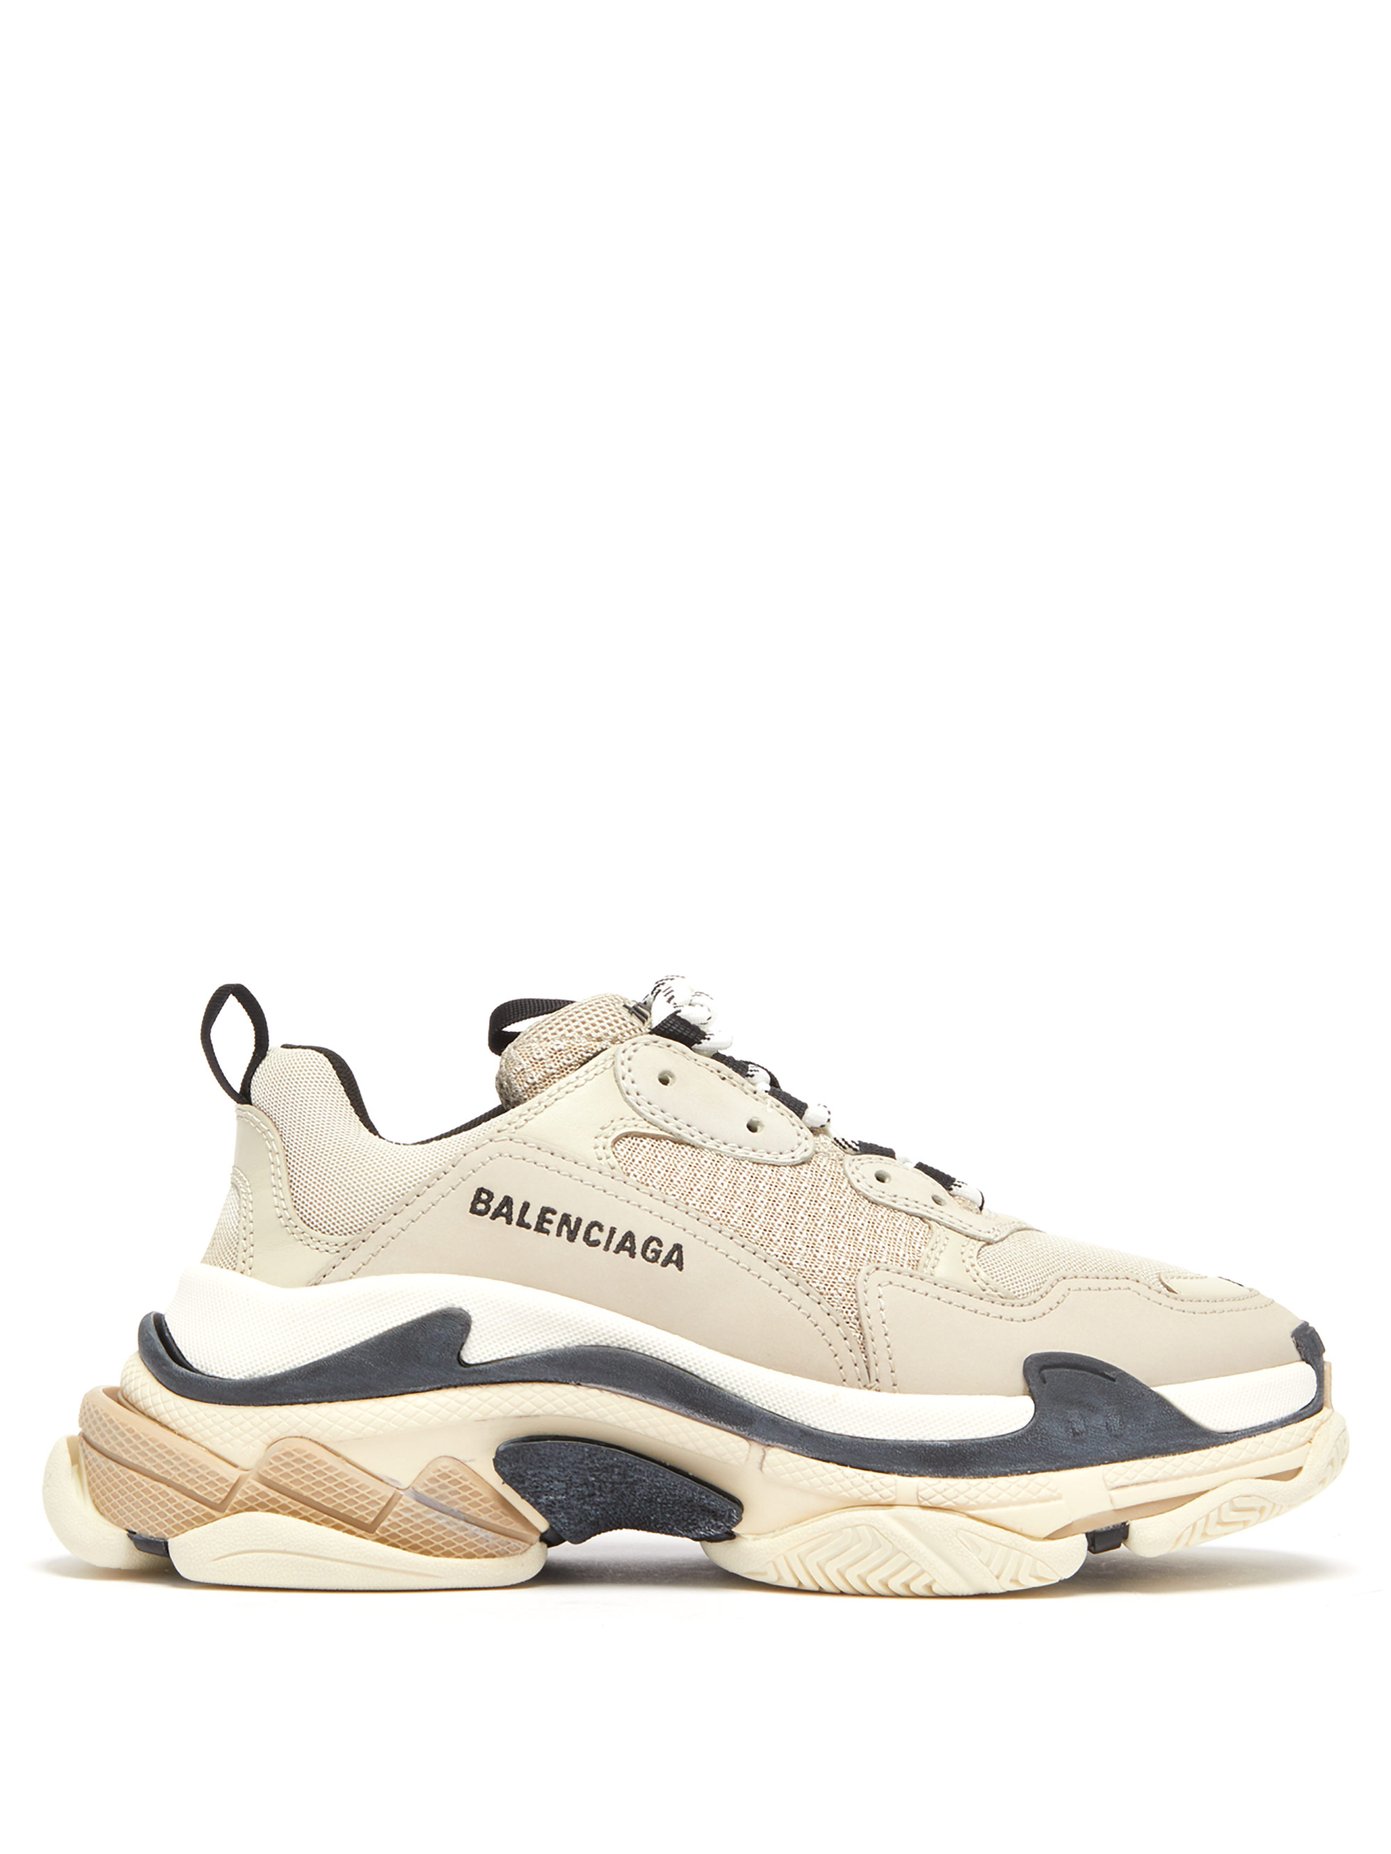 Balenciaga Leather Mint Clear Sole Triple S Sneakers By in